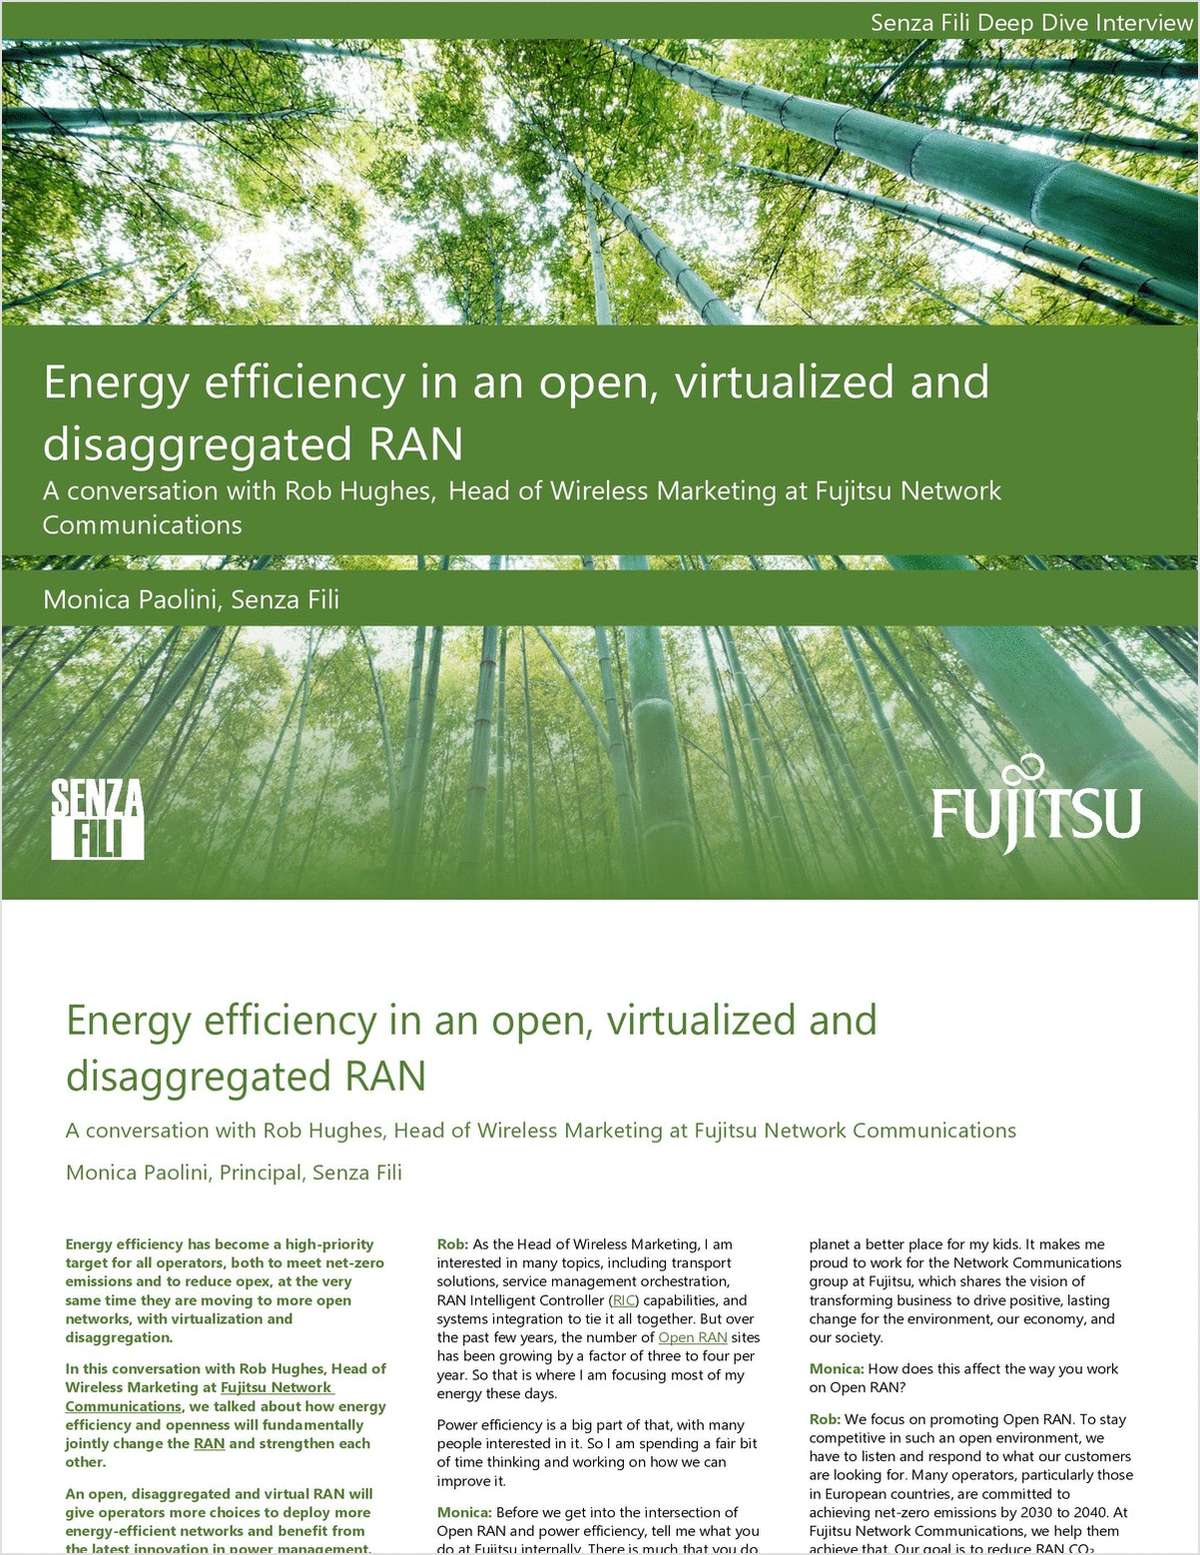 Energy efficiency in an open, virtualized and disaggregated RAN